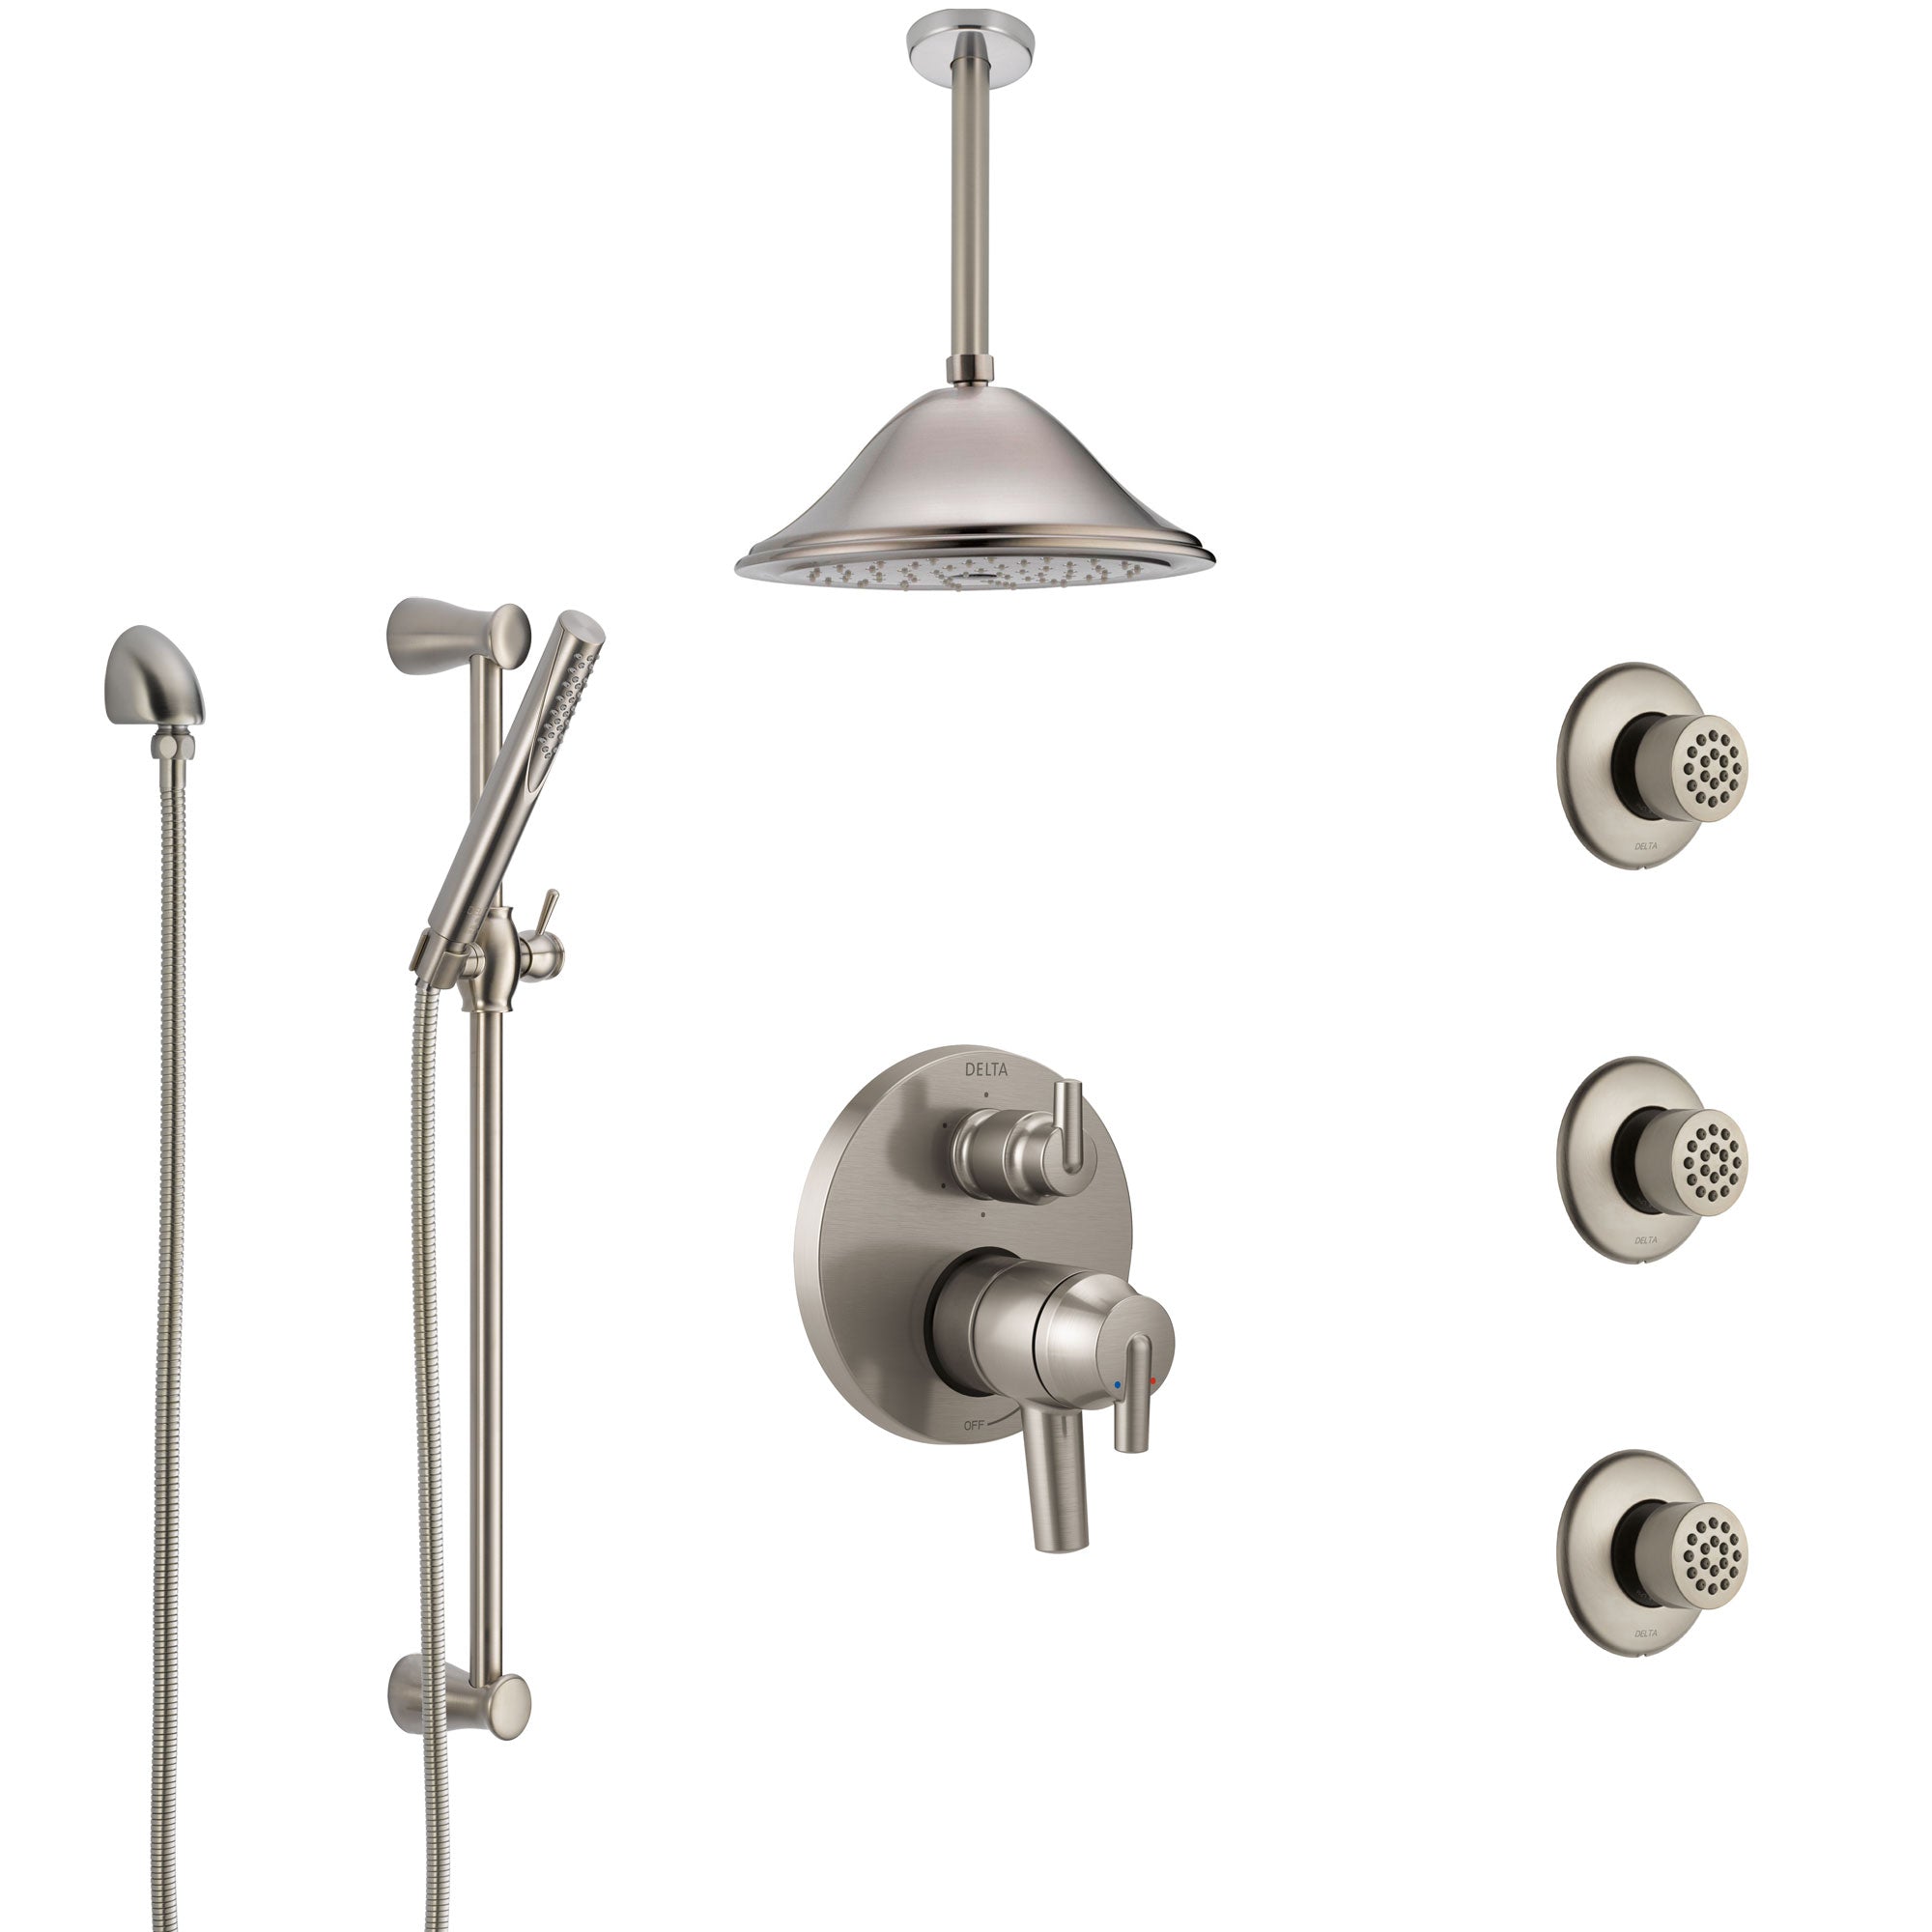 Delta Trinsic Dual Control Handle Stainless Steel Finish Integrated Diverter Shower System, Ceiling Showerhead, 3 Body Sprays, Hand Spray SS27959SS7